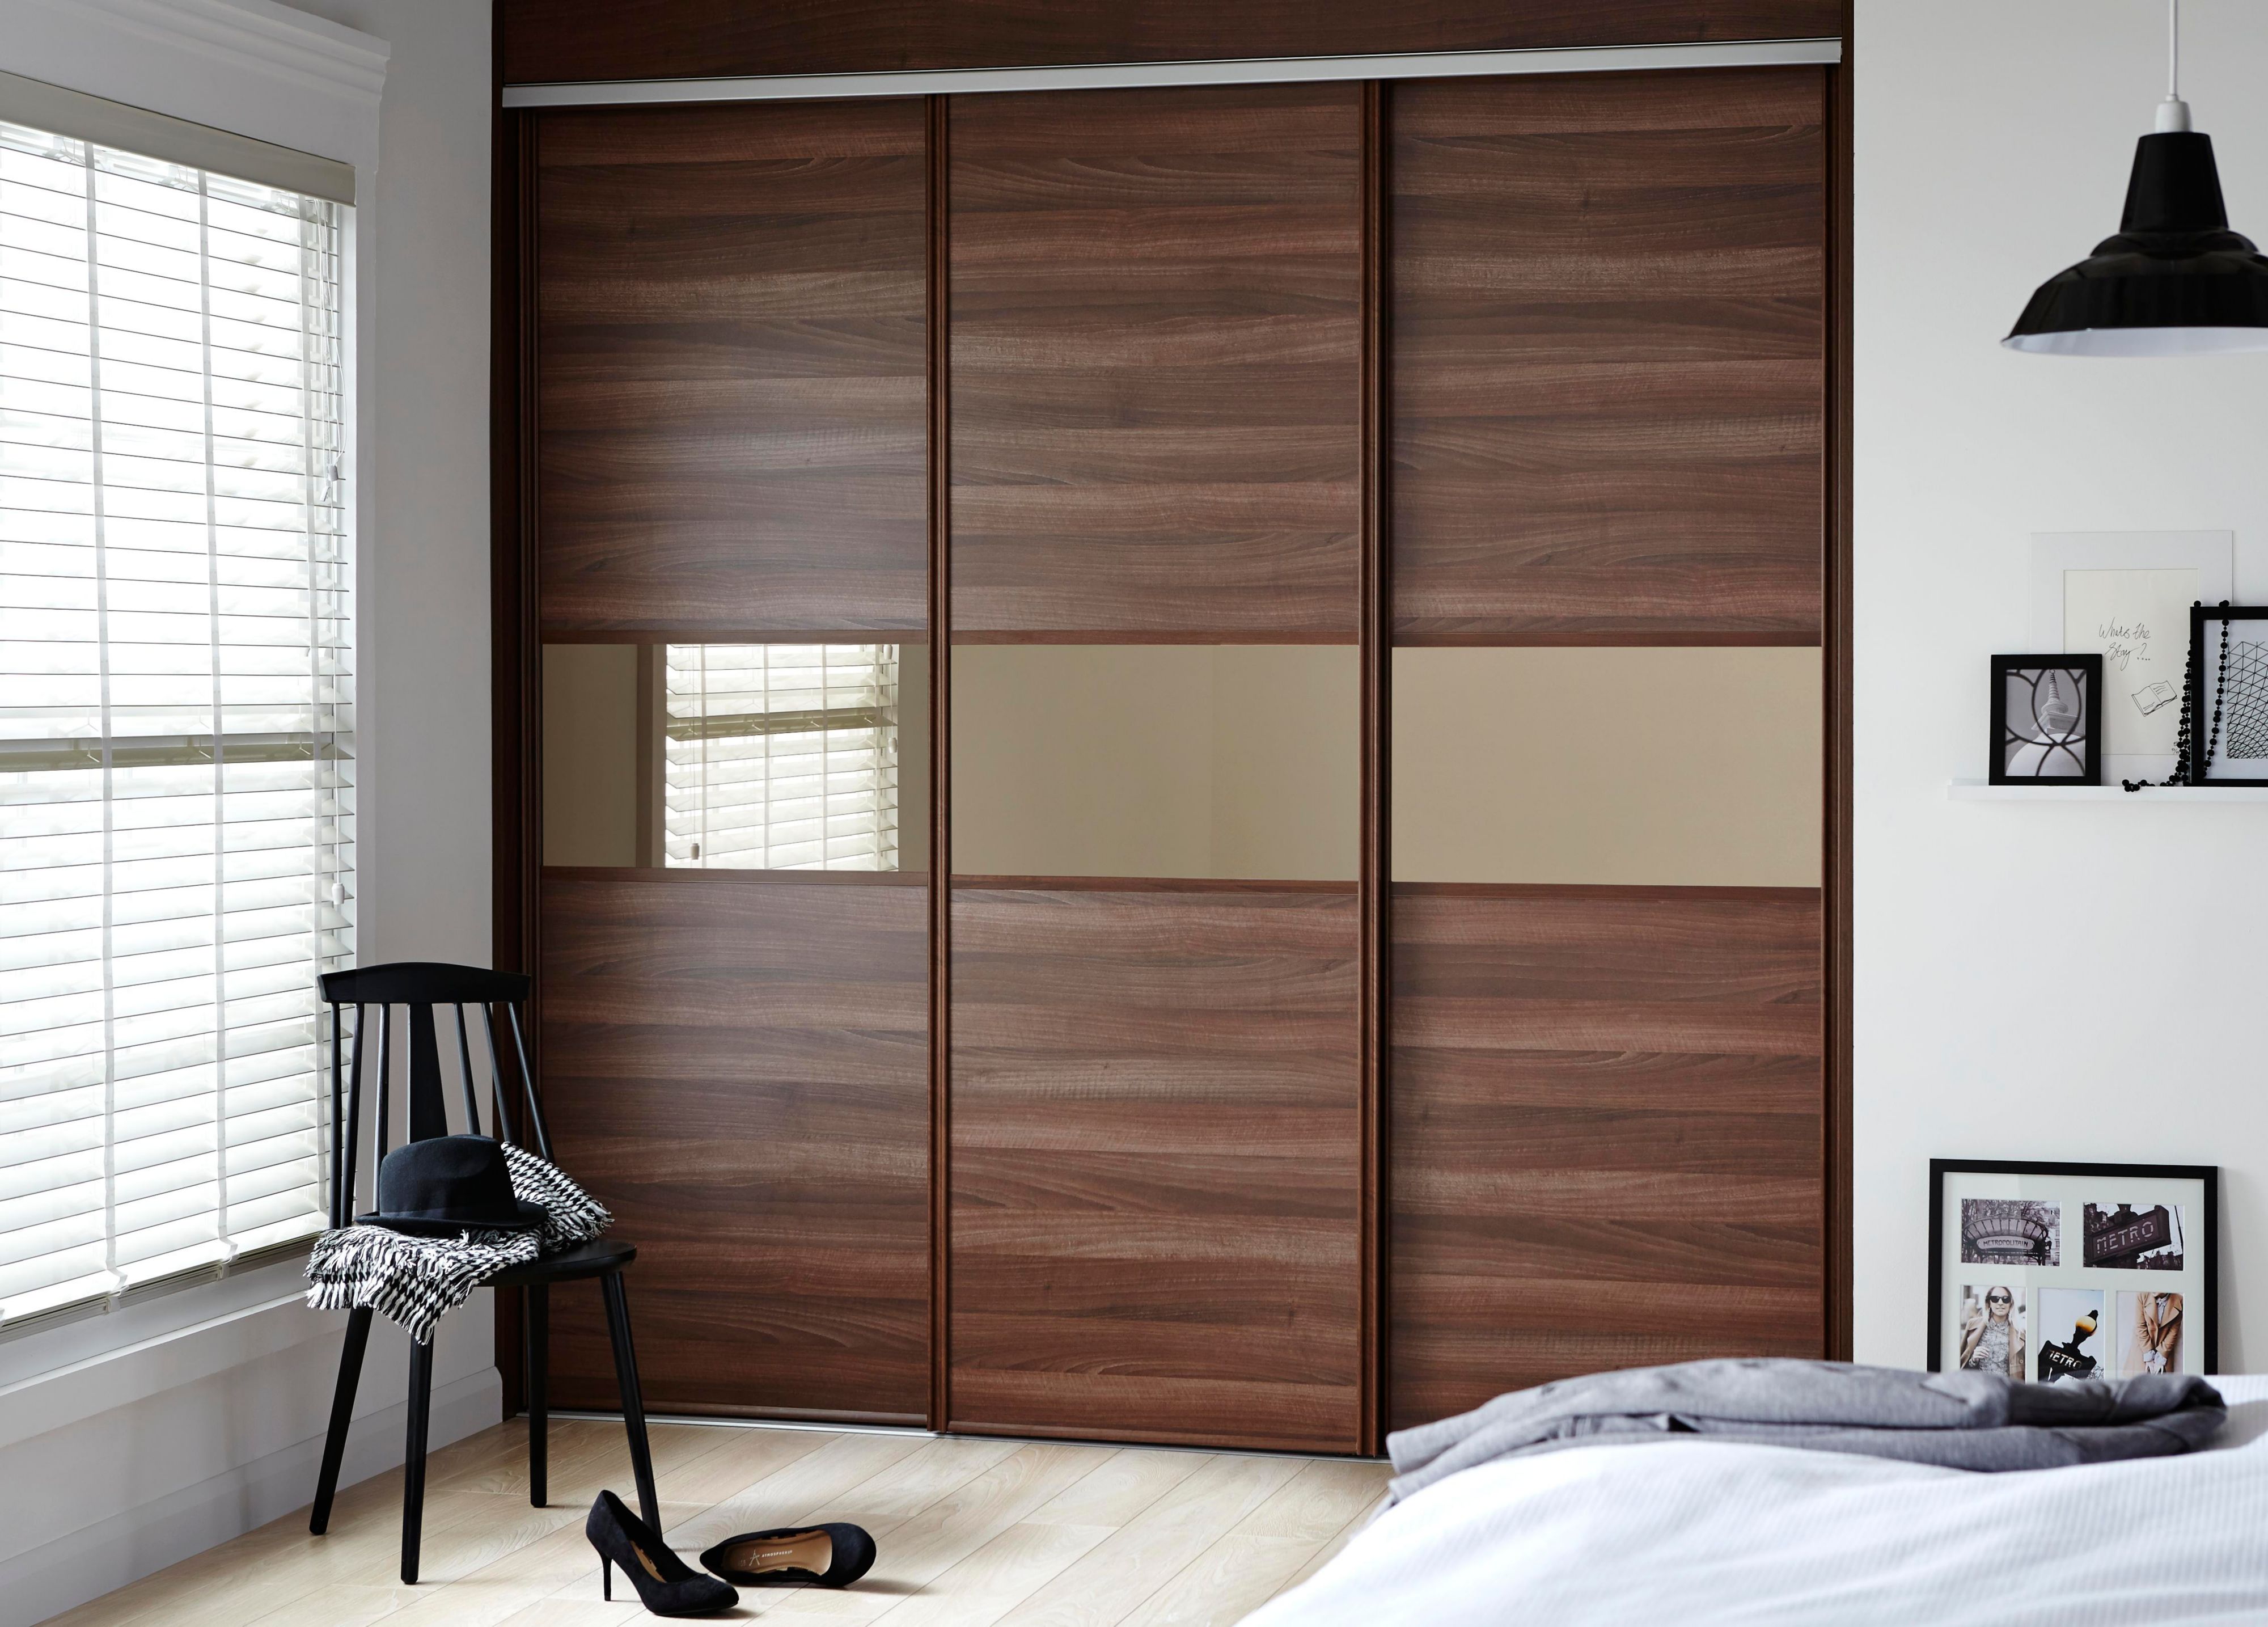 Wardrobe with sliding doors 1. Give your bedroom a nice look: GYAHYSH